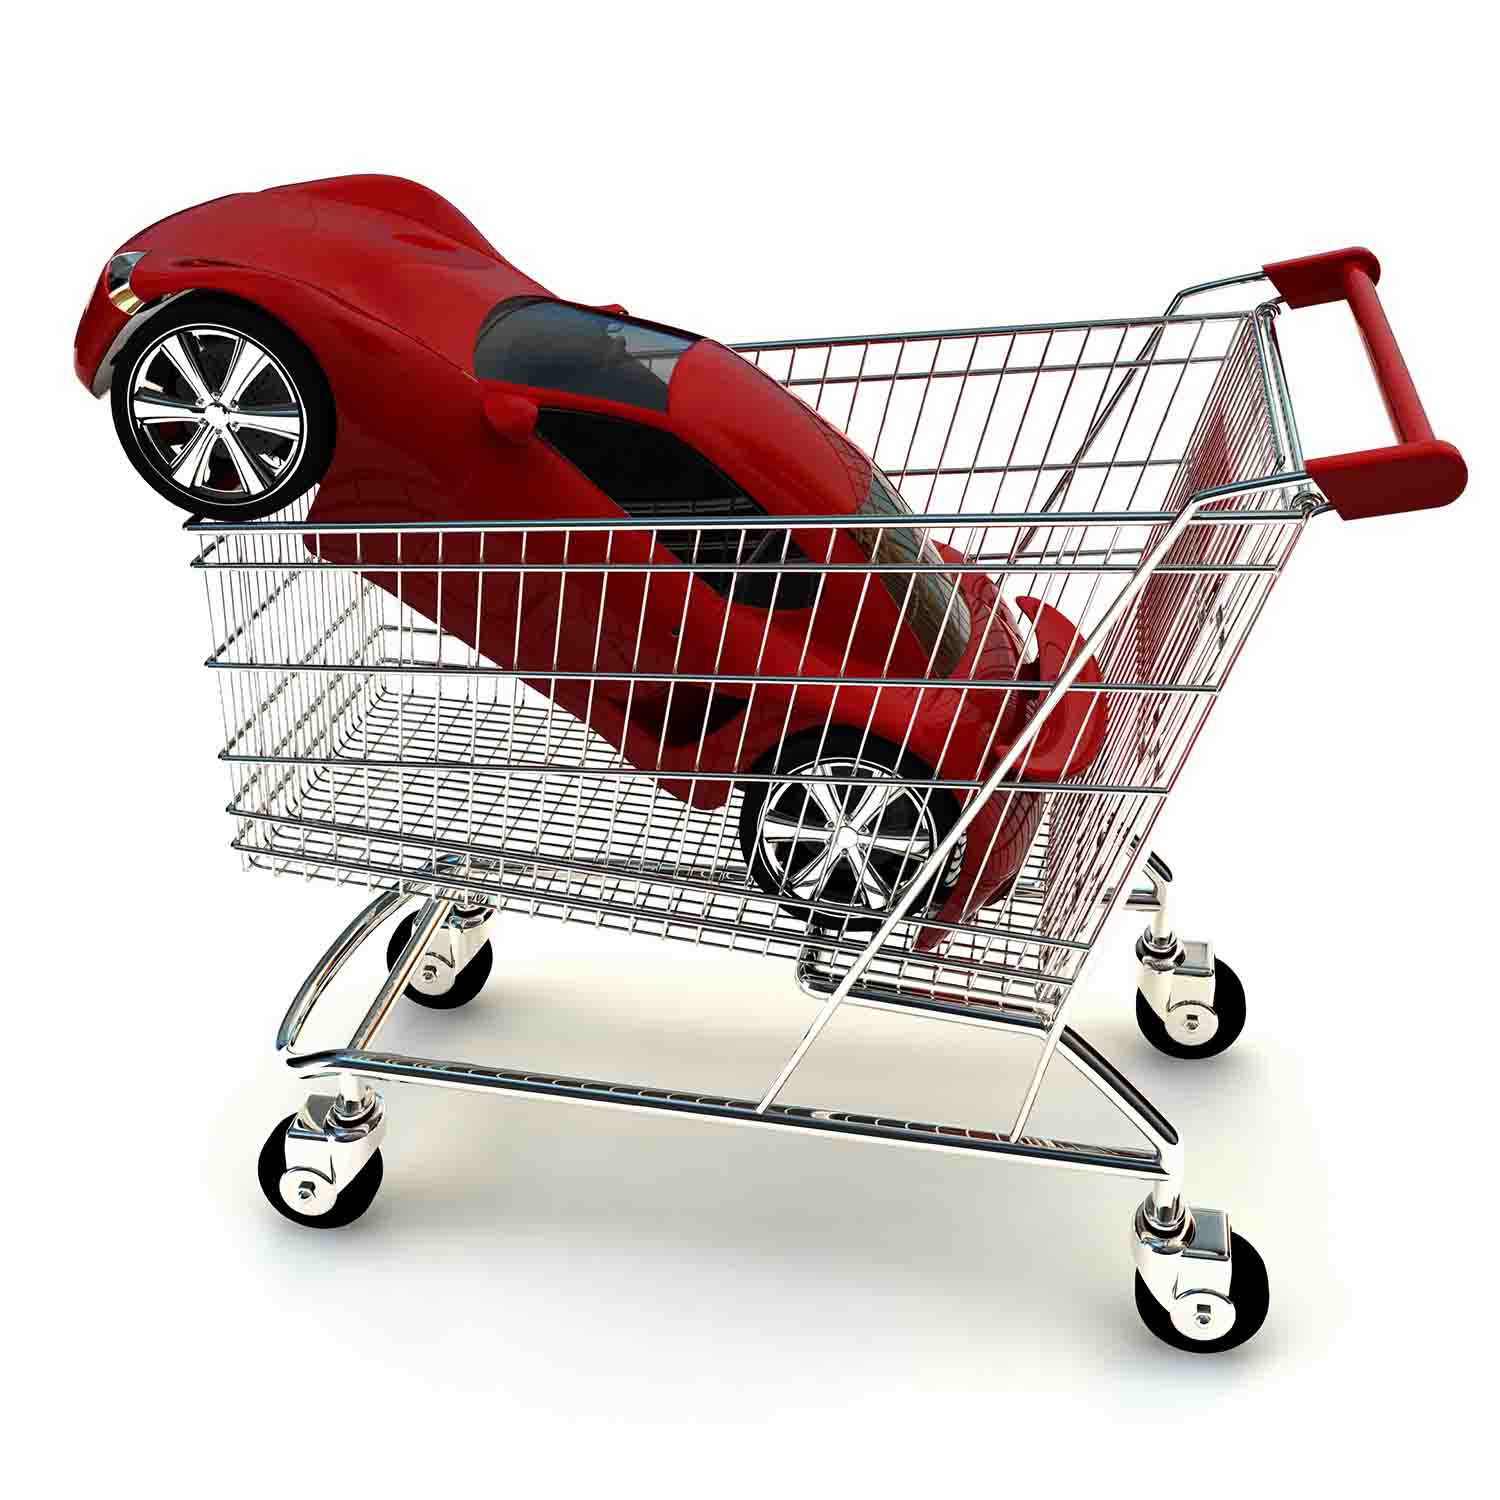 Image of a red sports car inside of a shopping cart.